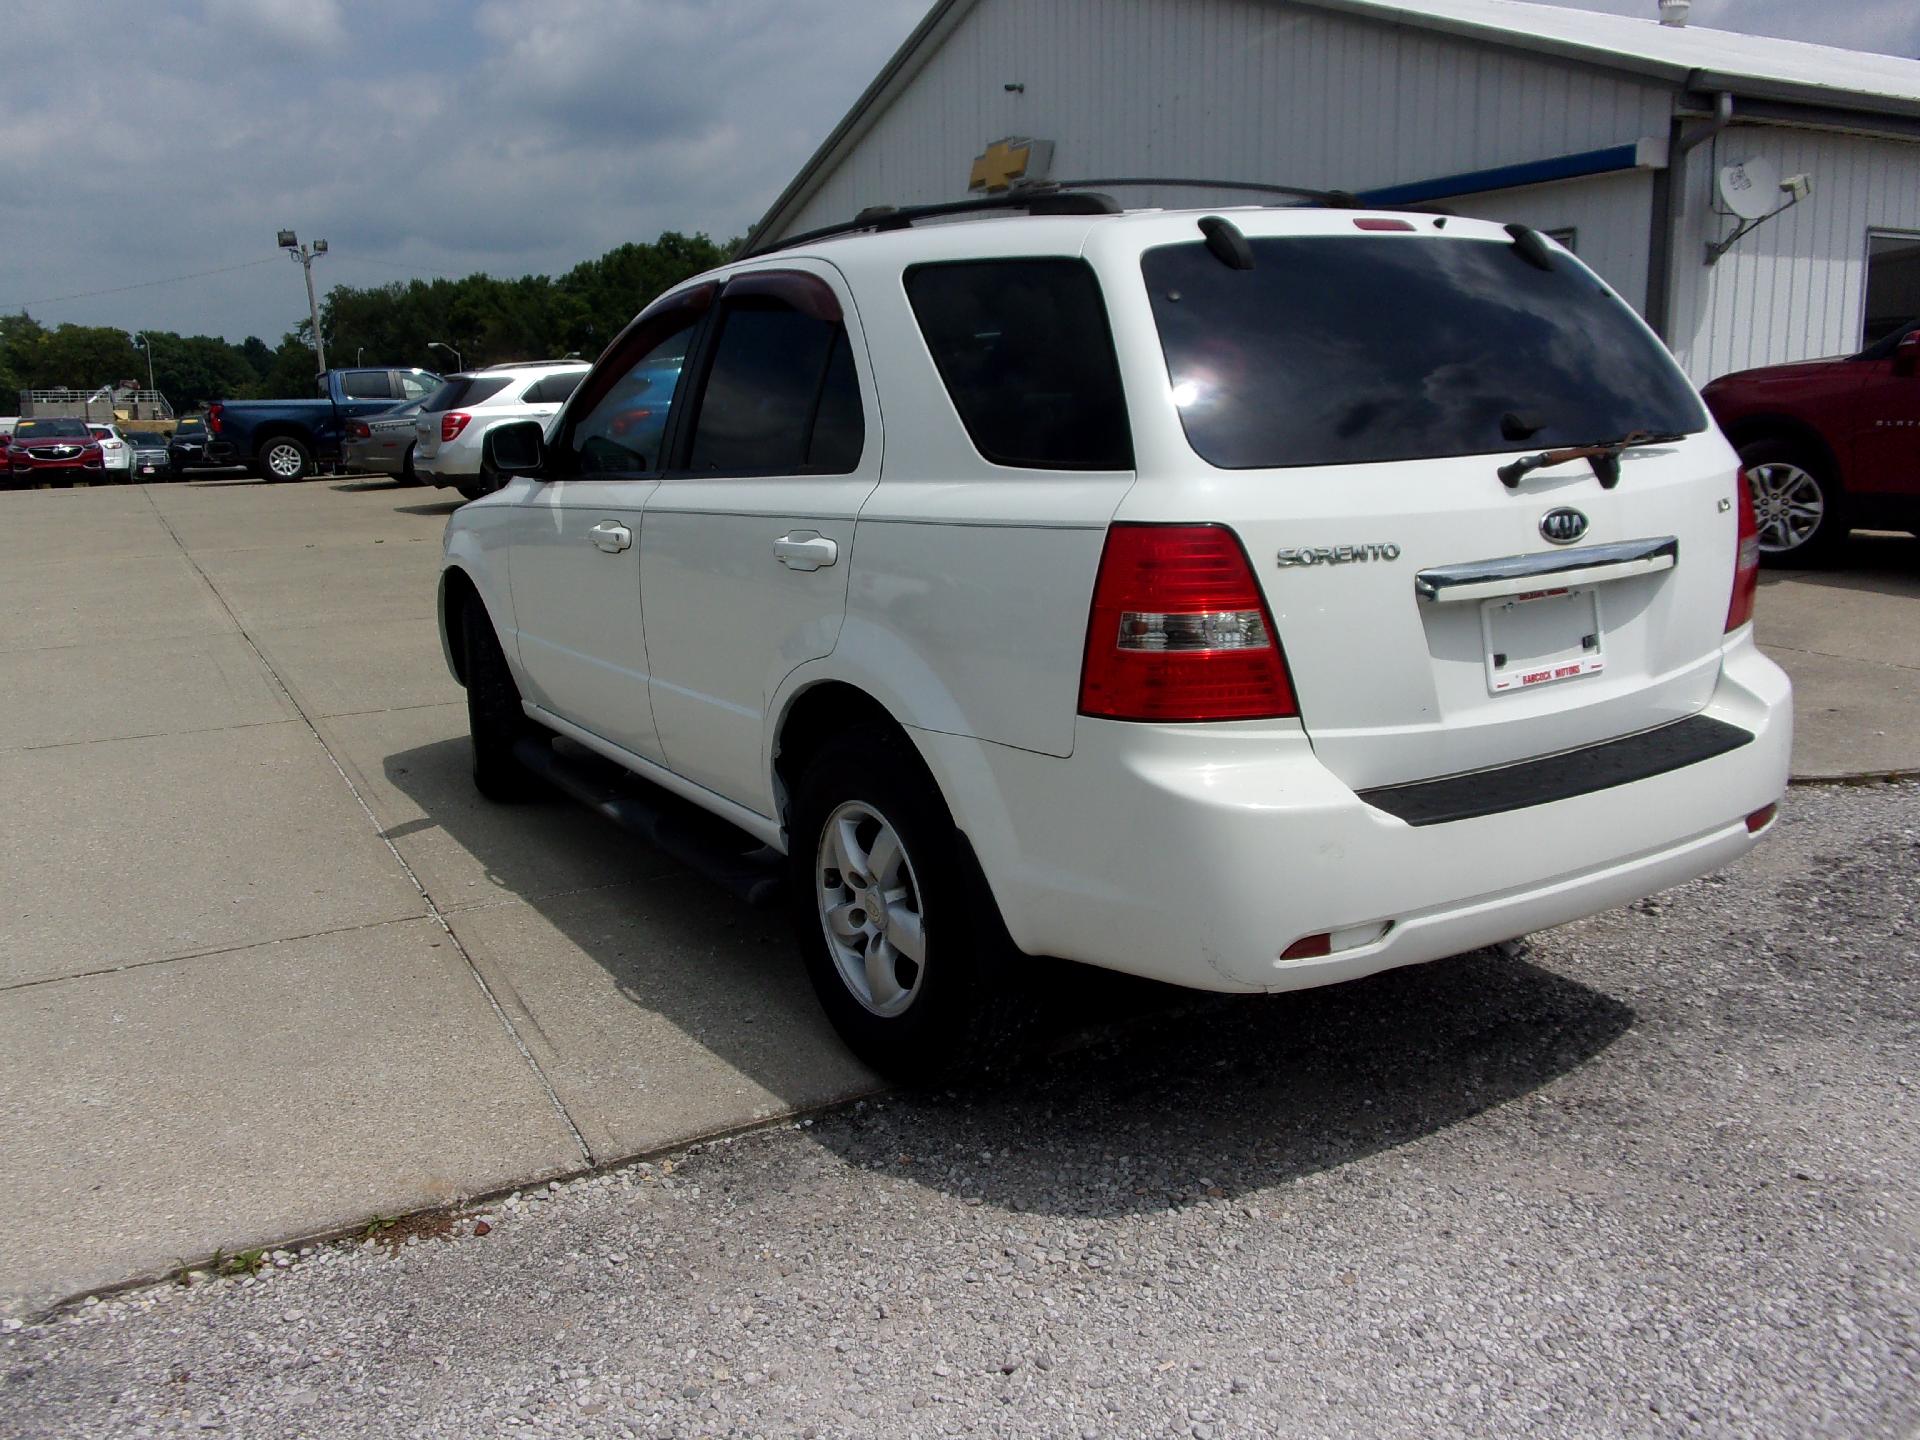 Used 2007 Kia Sorento LX with VIN KNDJC736775692470 for sale in Orleans, IN